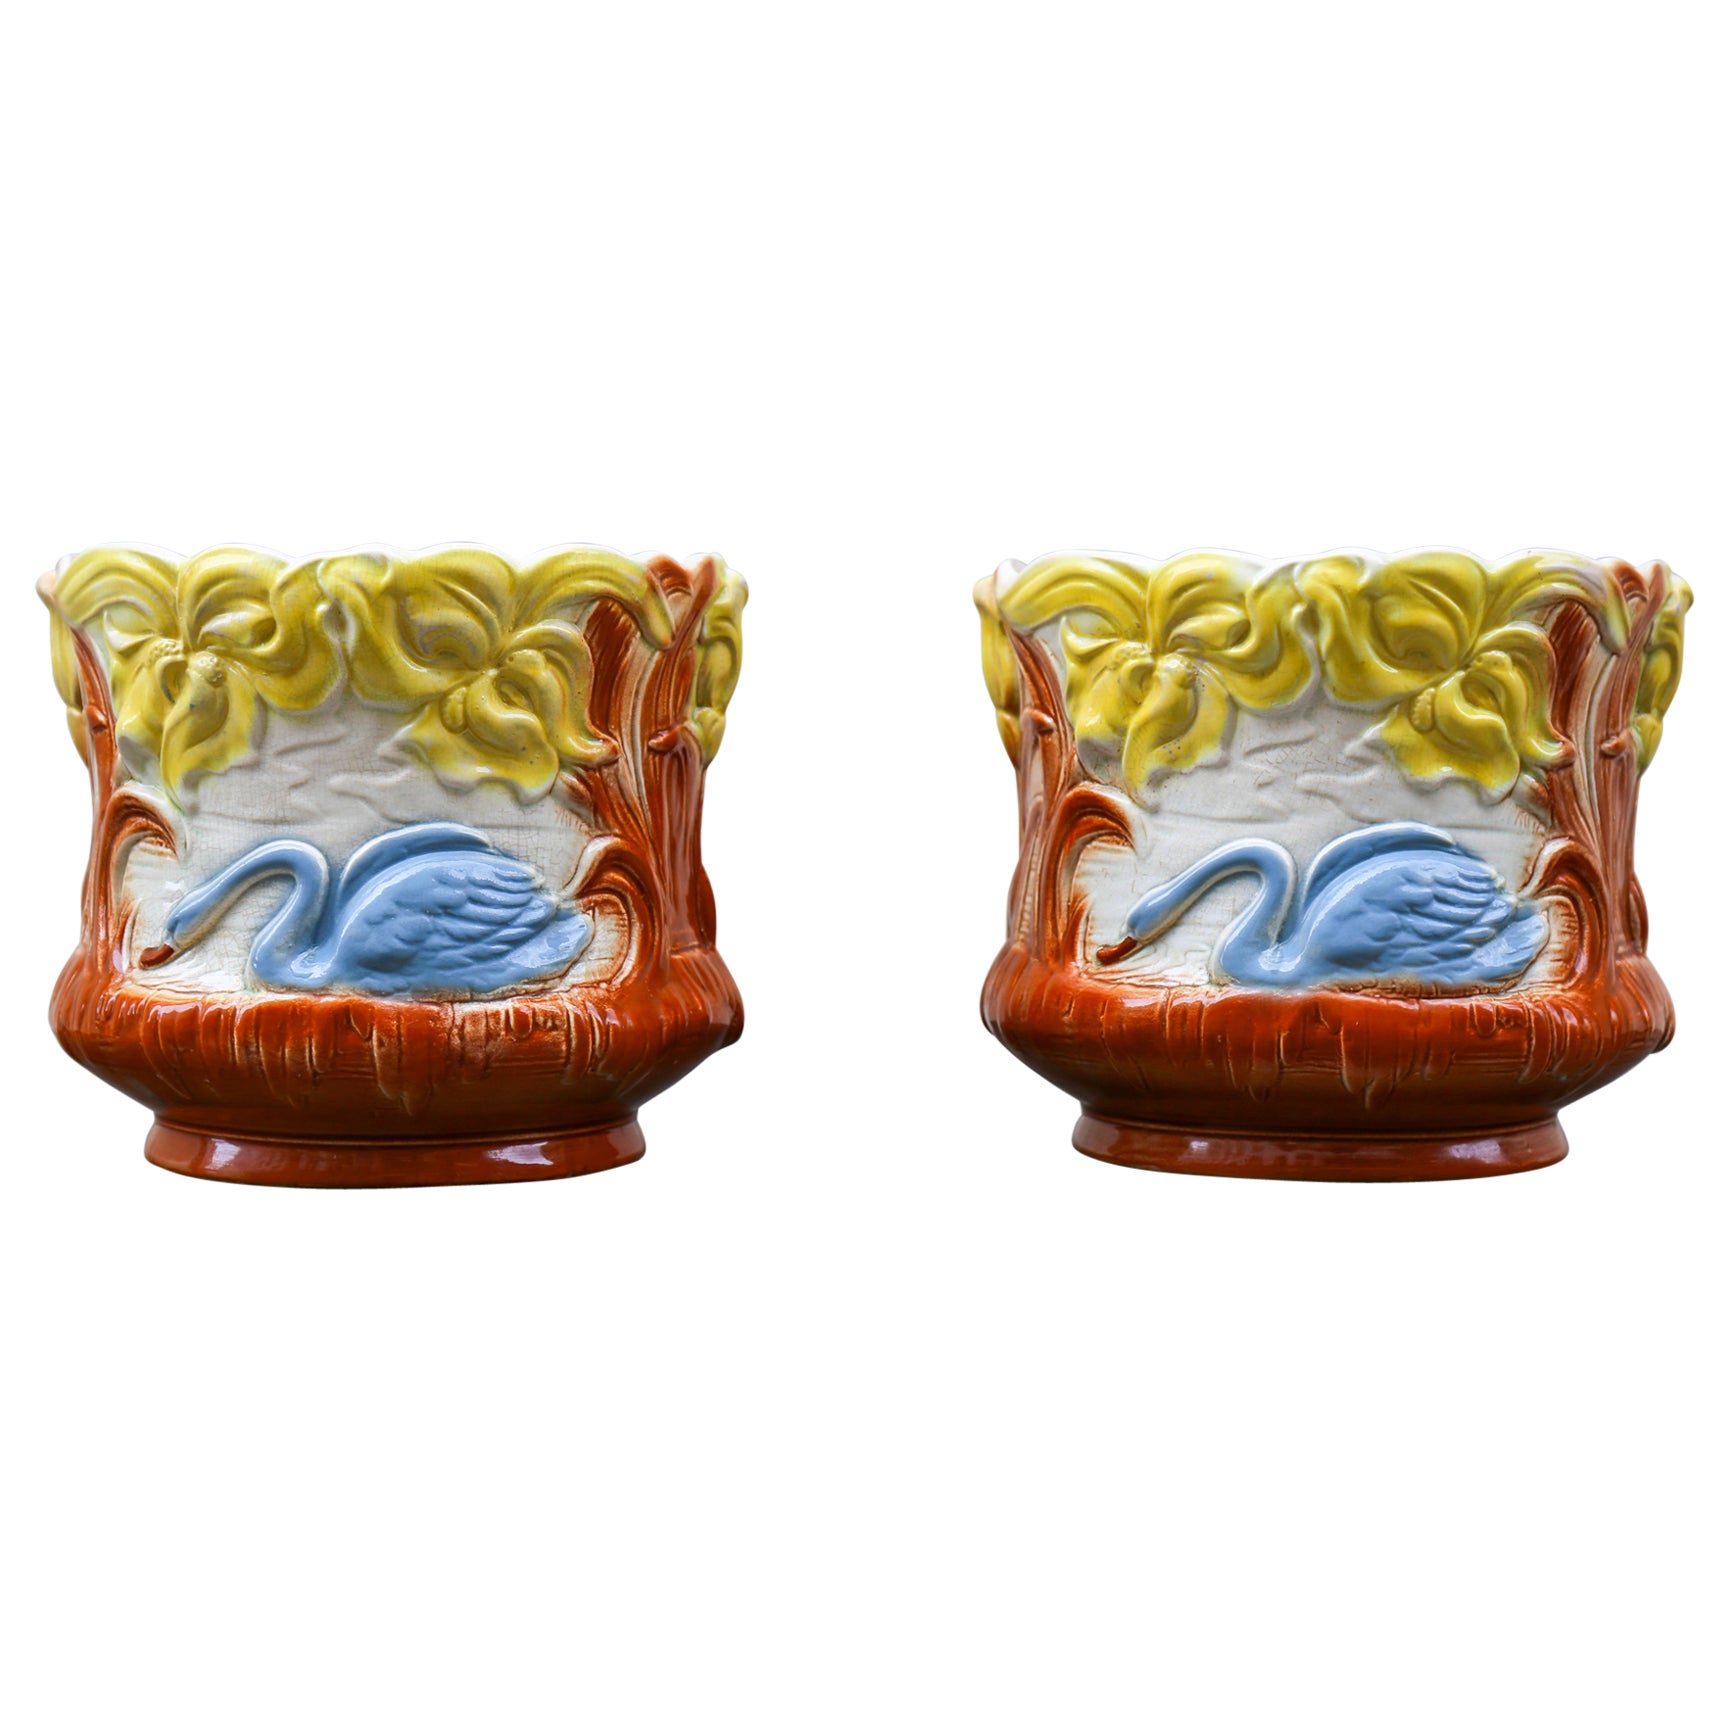 Pair Art Nouveau Swan Planters Jardinieres, Majolica, early 20th Century, France For Sale